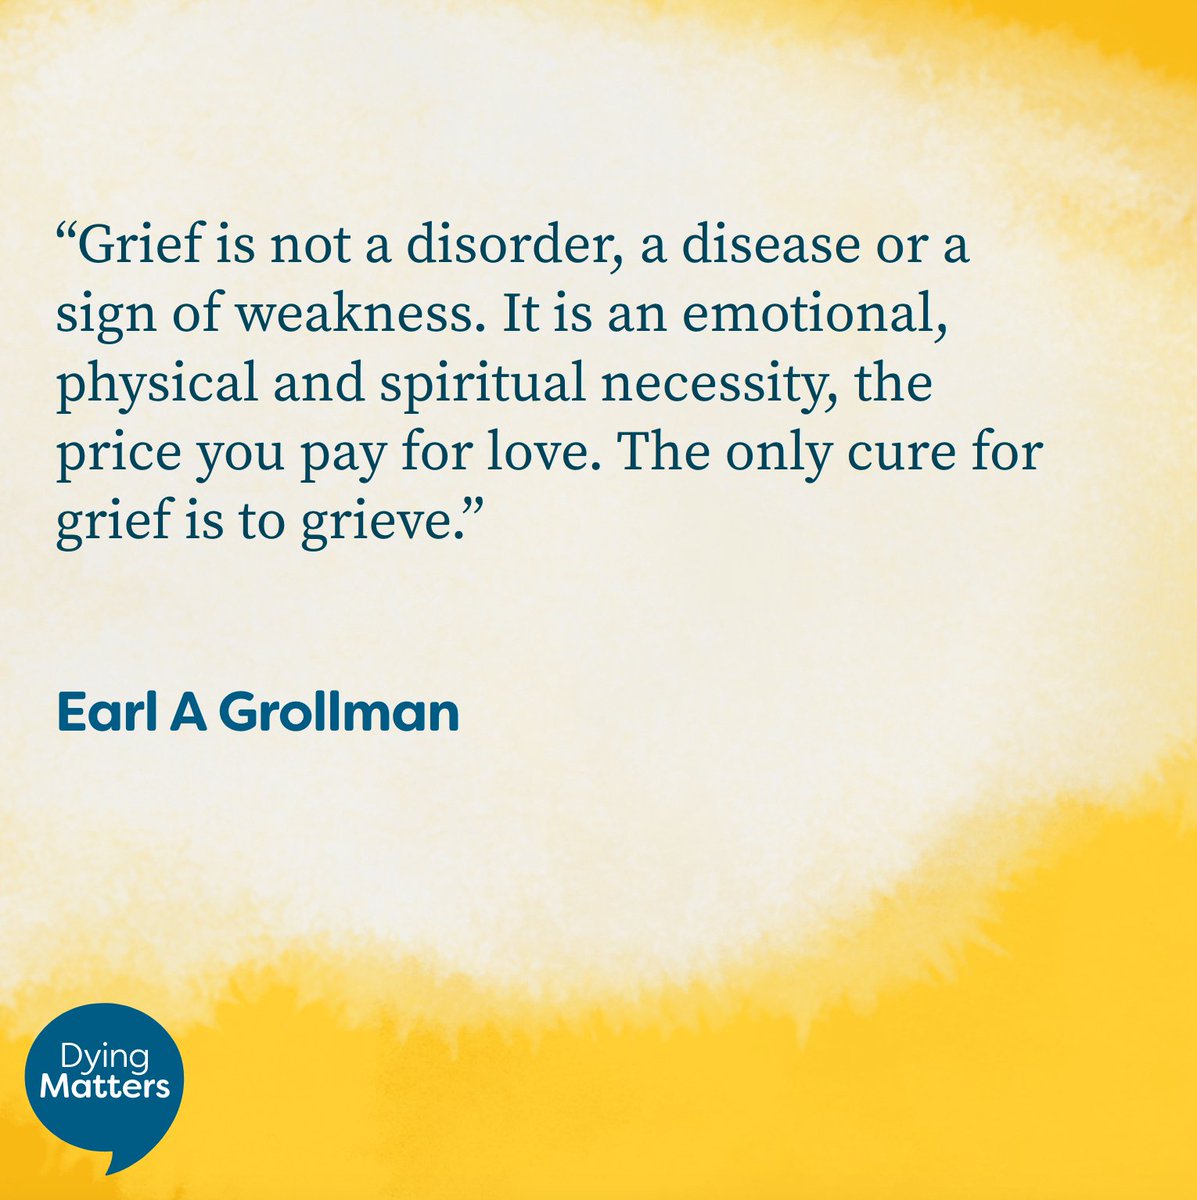 Thank you Earl A Grollman for this perspective on grief for our #GriefWords this week 💛